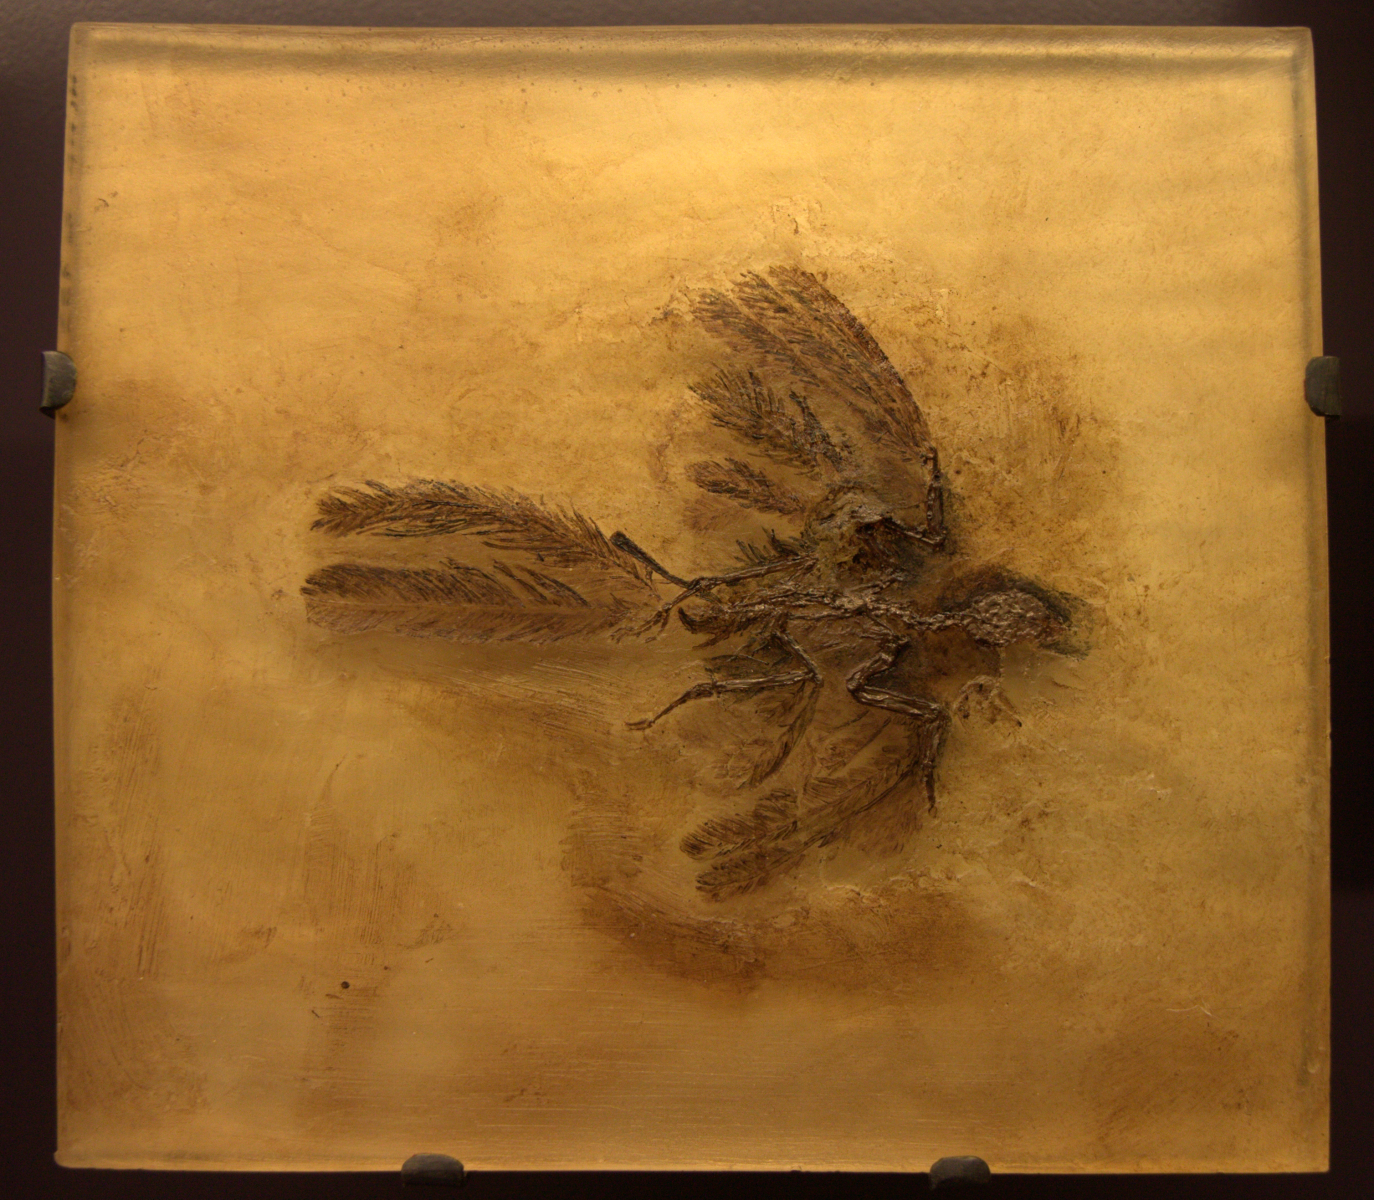 Fossil of Parargarnis - an insectivorous bird that was similar to present day hummingbirds